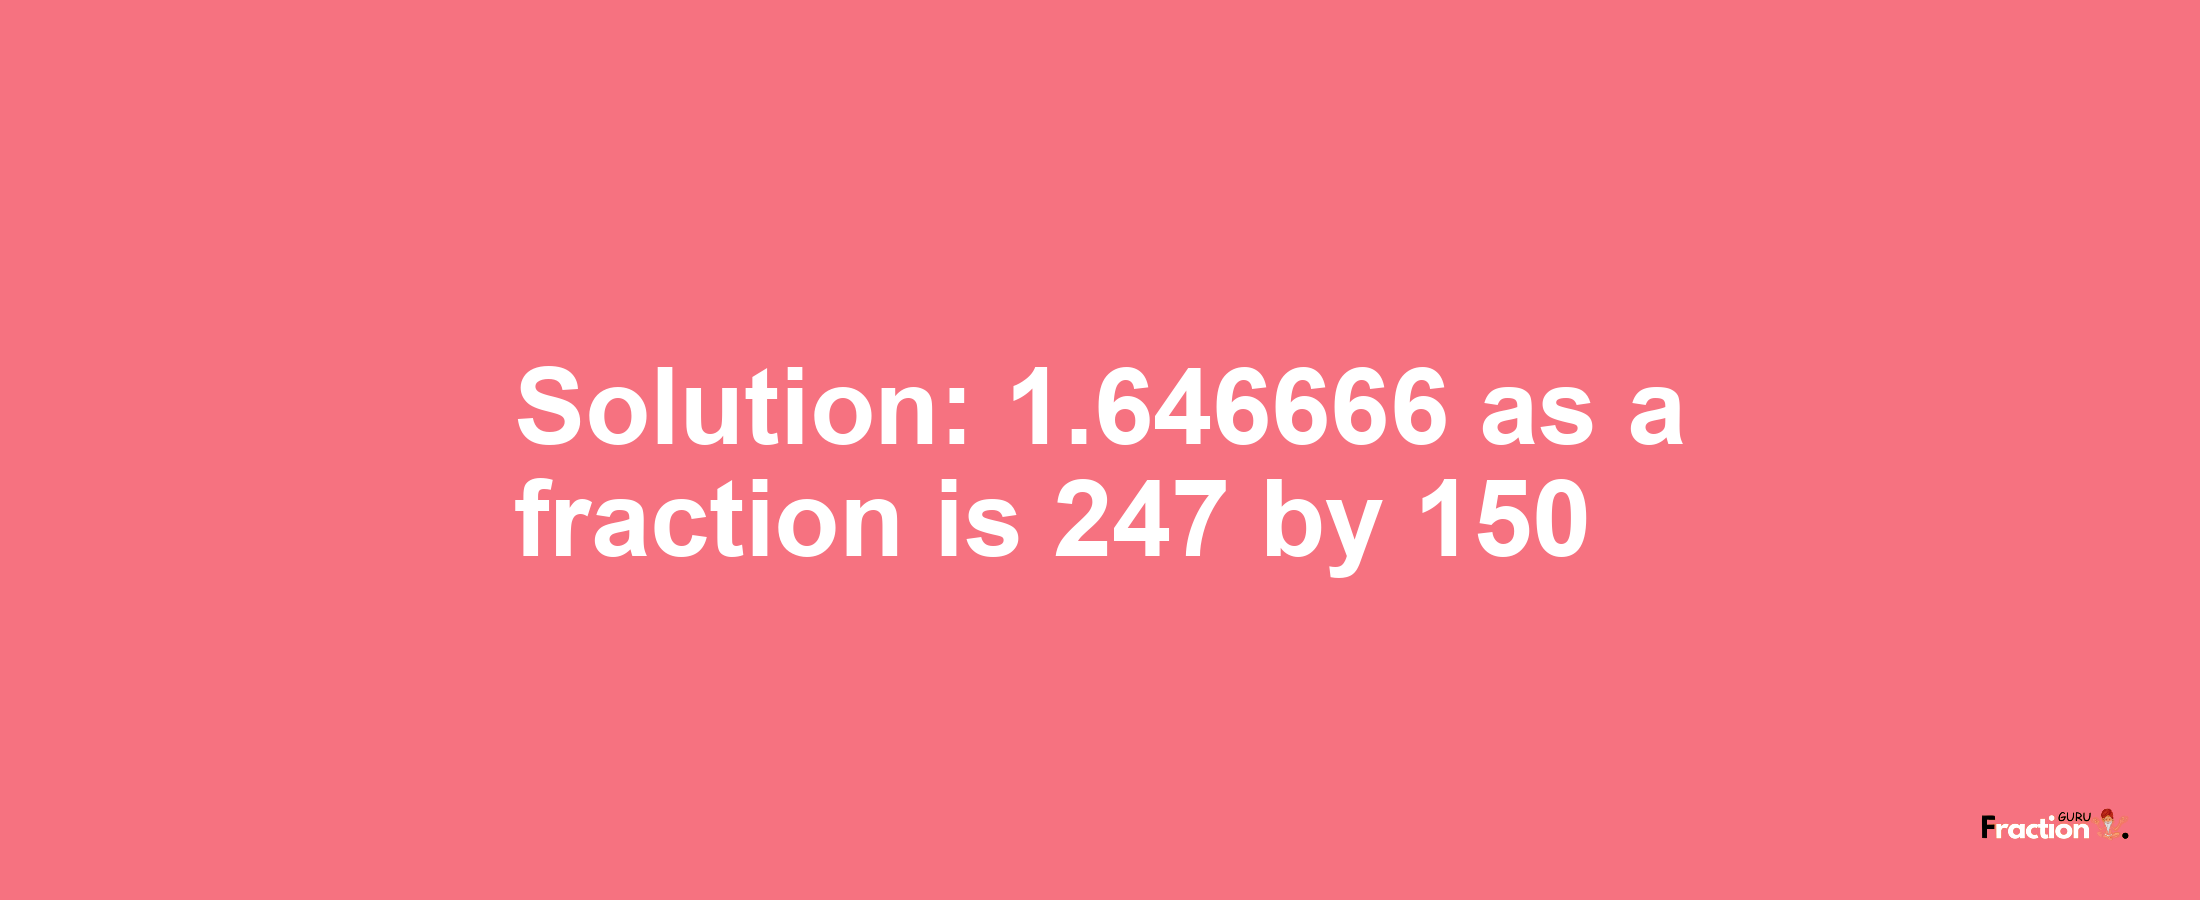 Solution:1.646666 as a fraction is 247/150